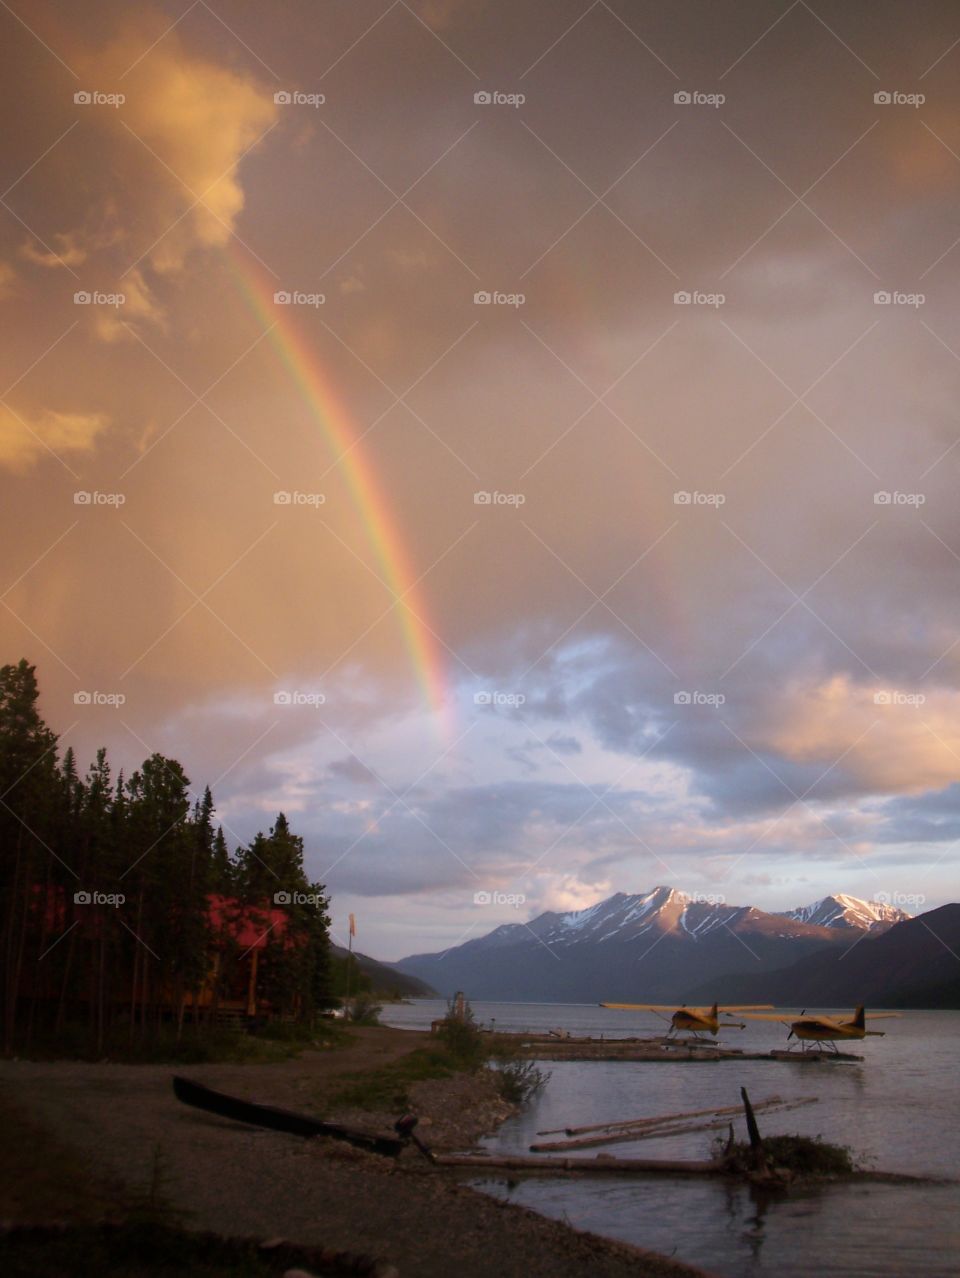 Seaplanes, mountains, a lake, and a rainbow 